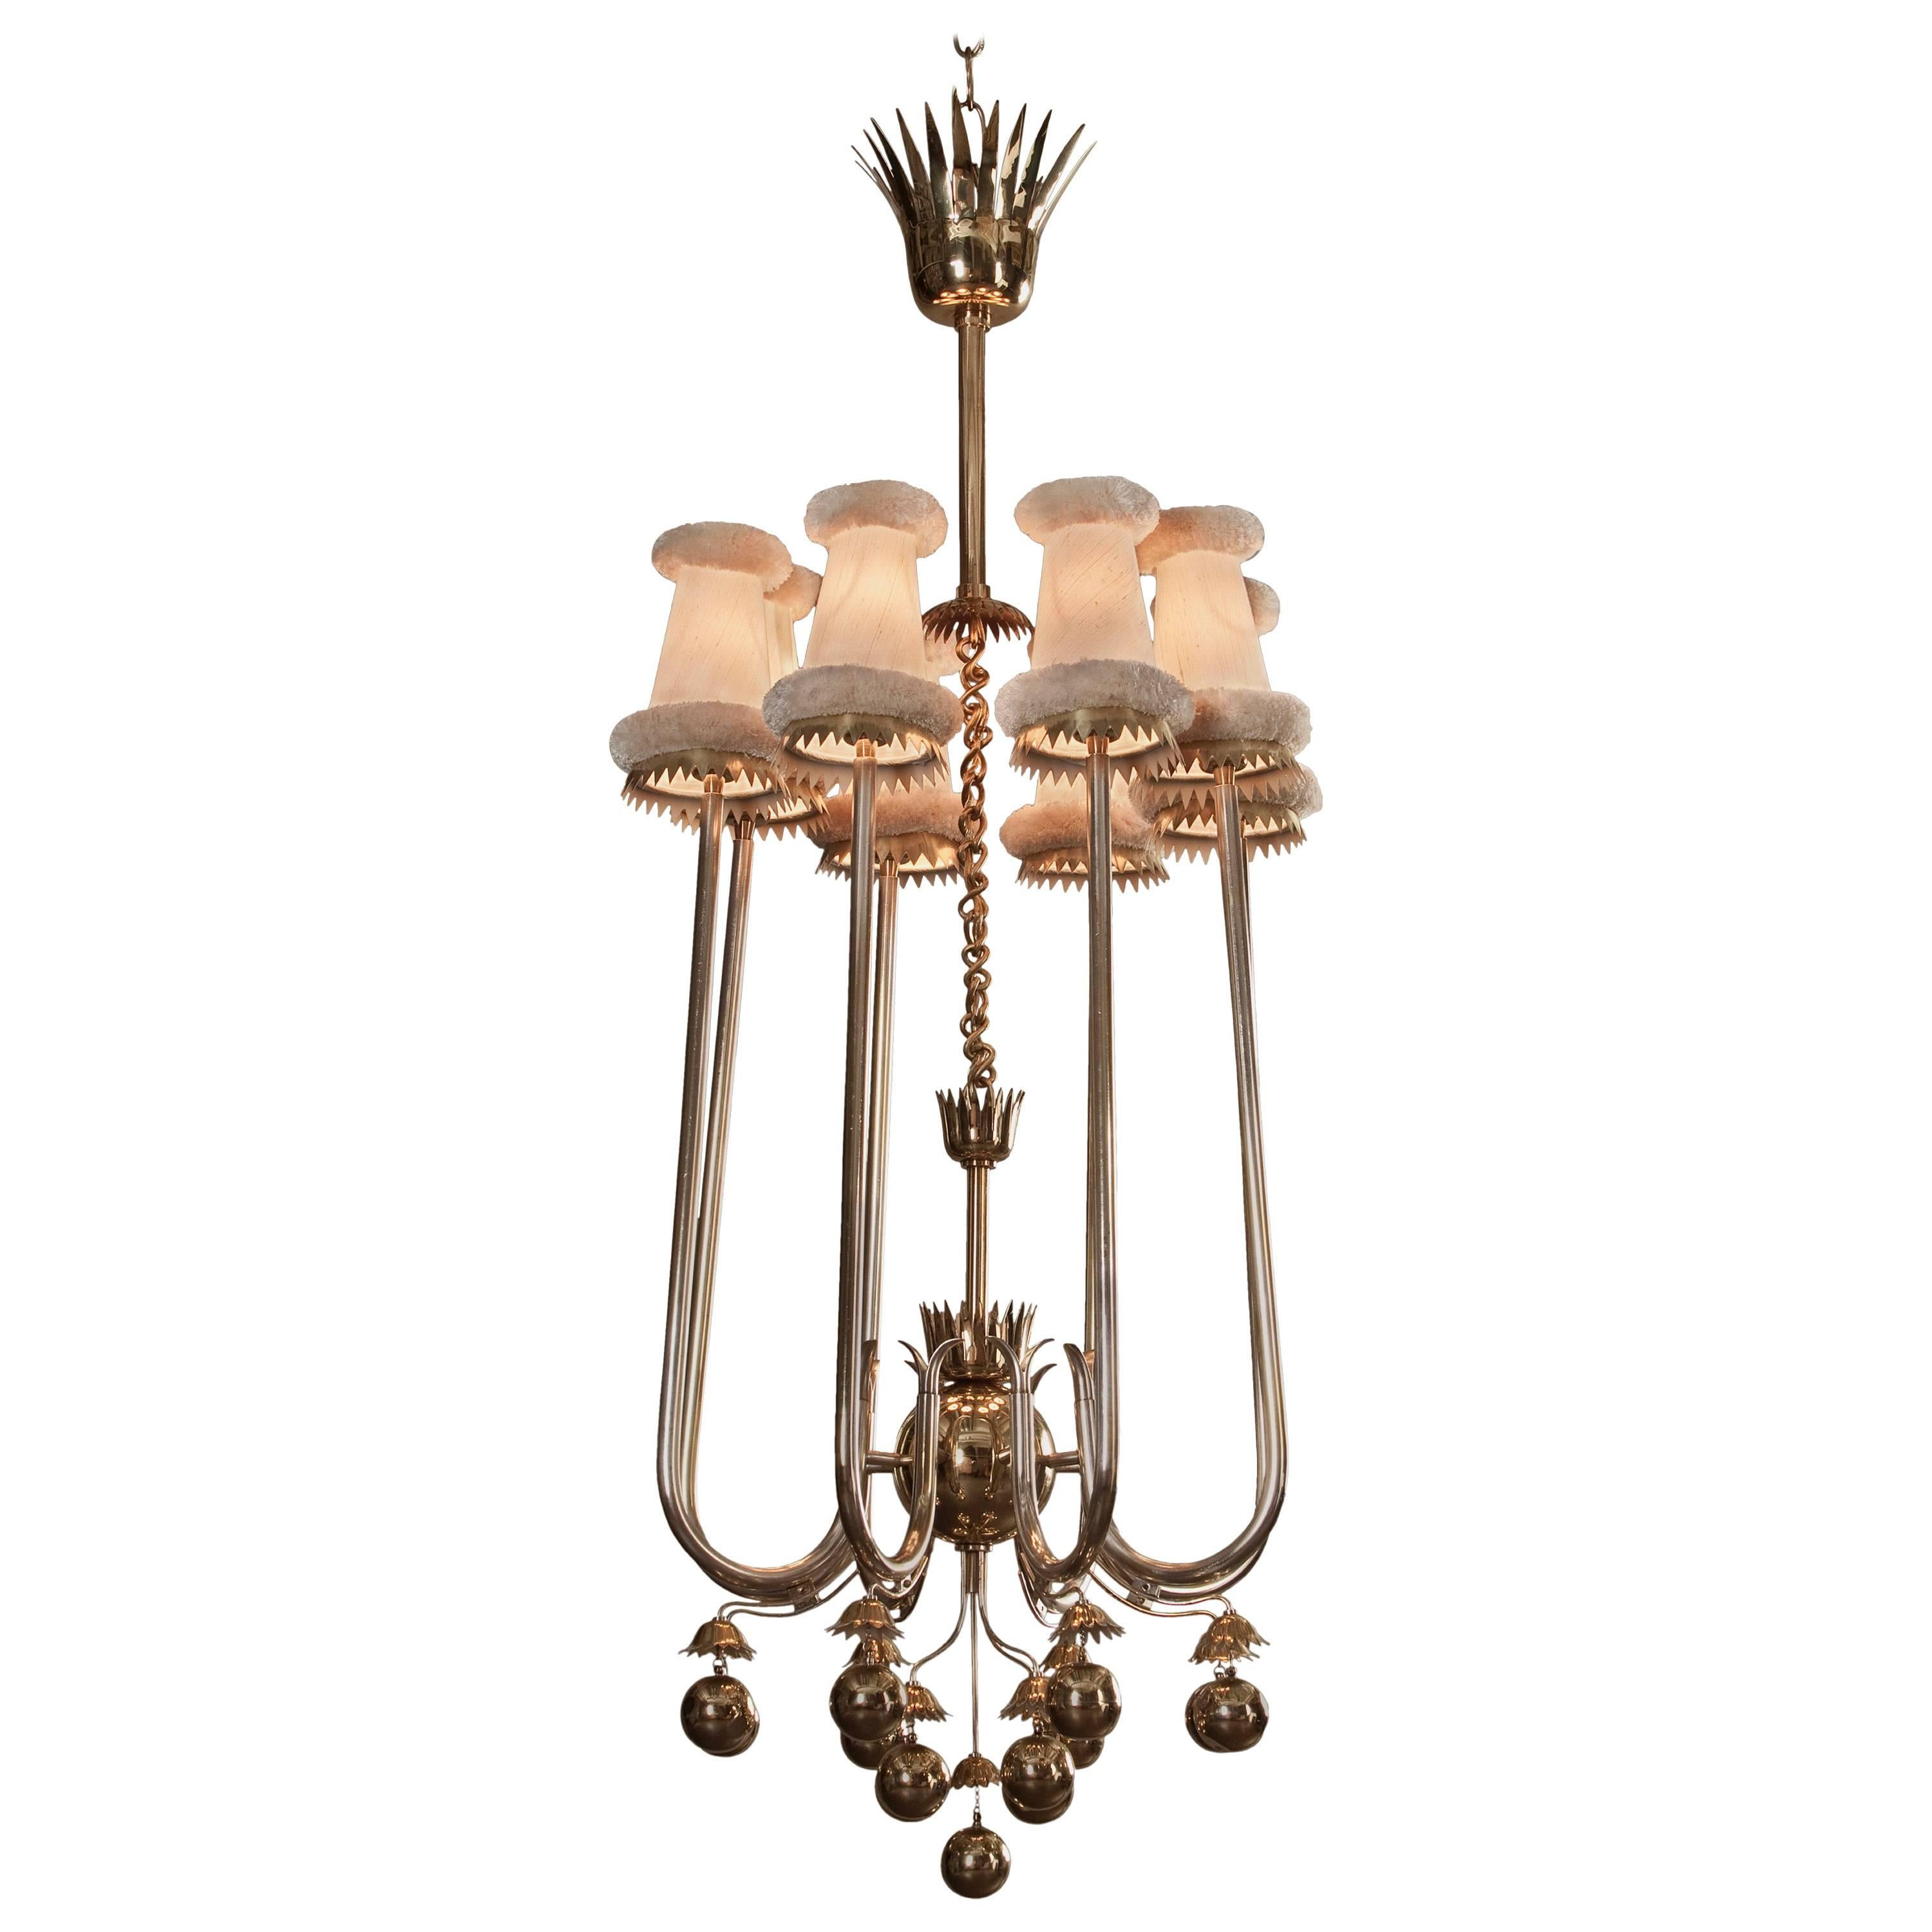 Pietro Chiesa for Fontana Arte, Silvered and Gilt Brass 8 Light Chandelier For Sale